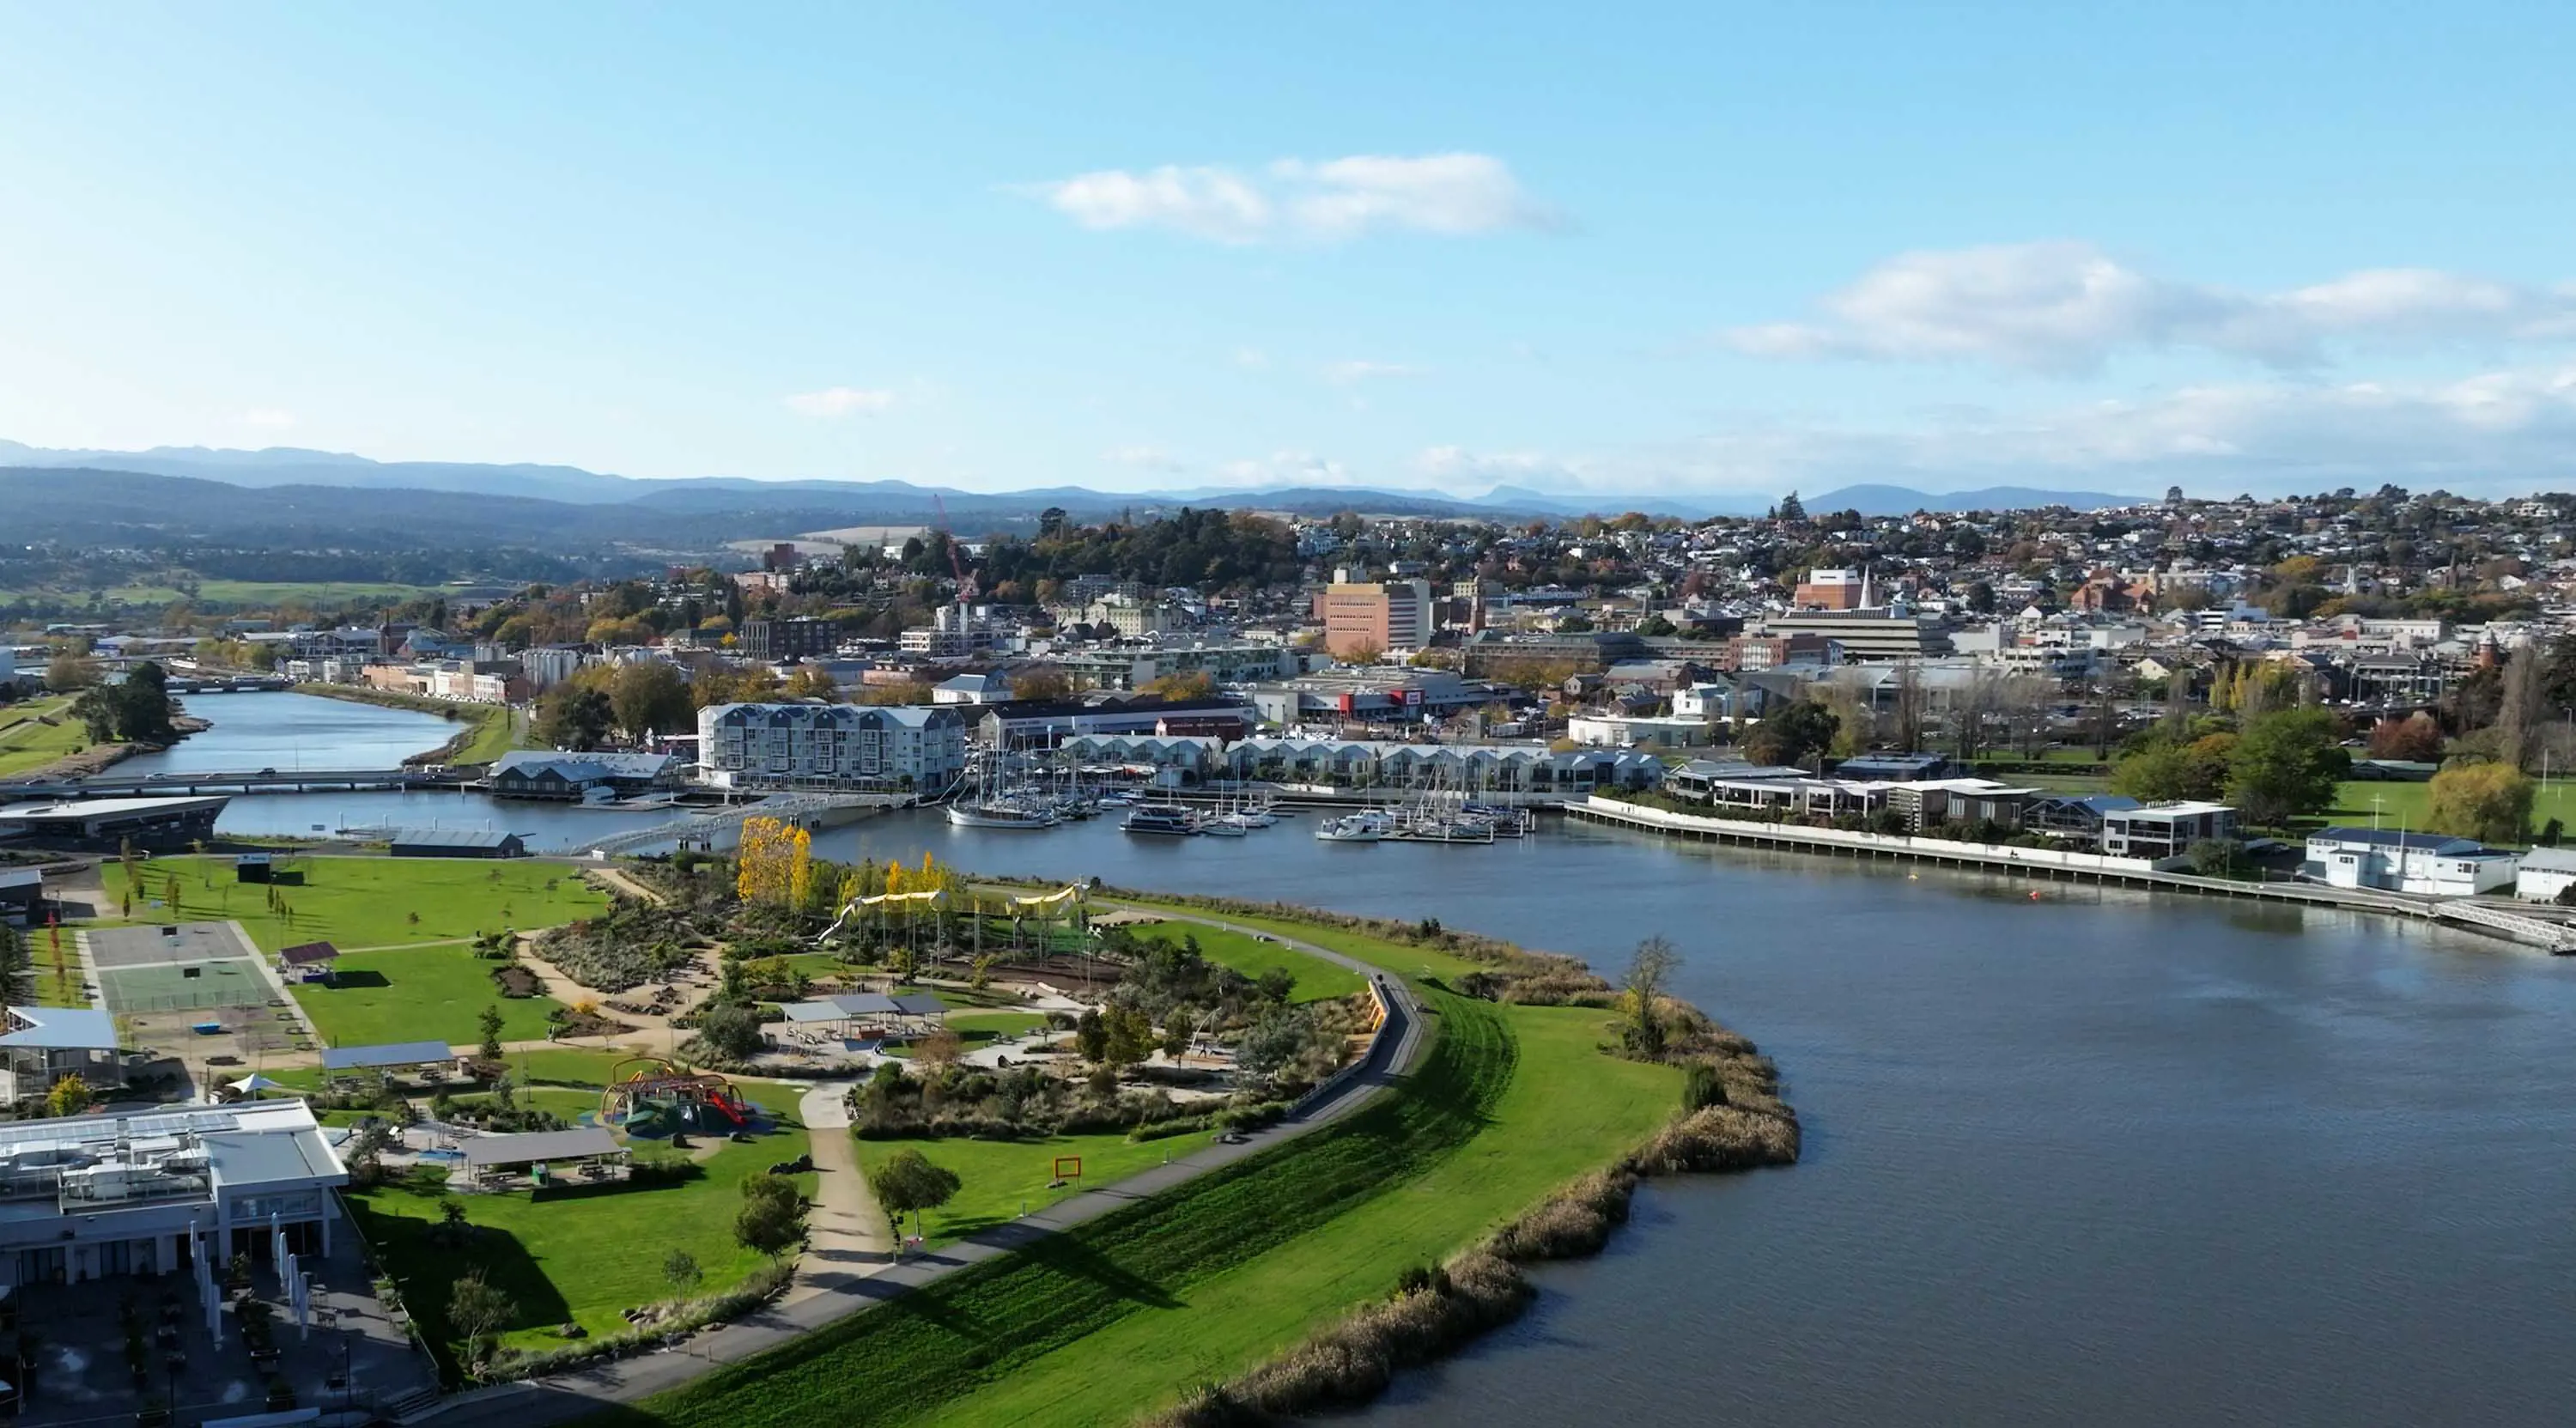 An aerial view of Launceston looking across the Tamar River, with a large park in the foreground and the city in the background.